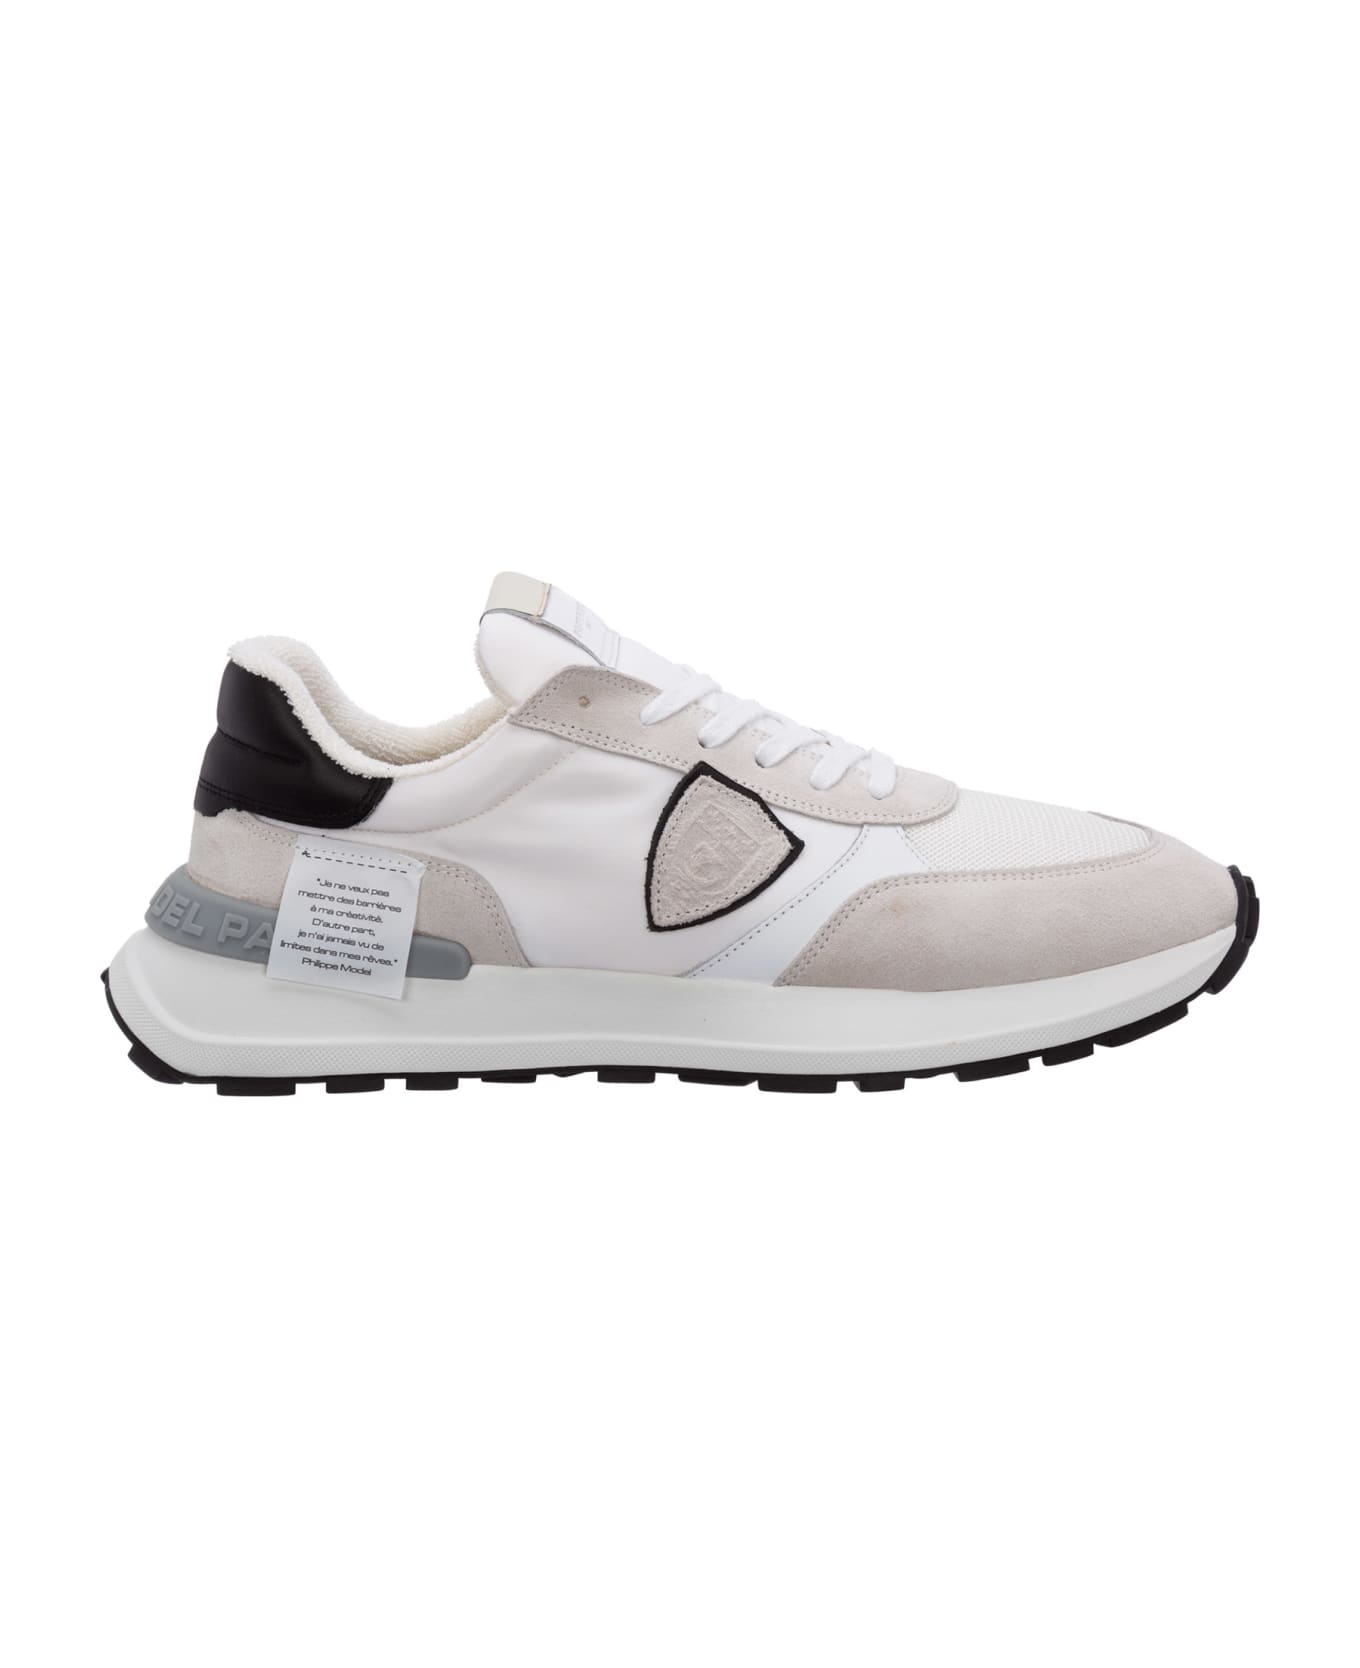 Philippe Model Antibes Leather Sneakers - Blanc